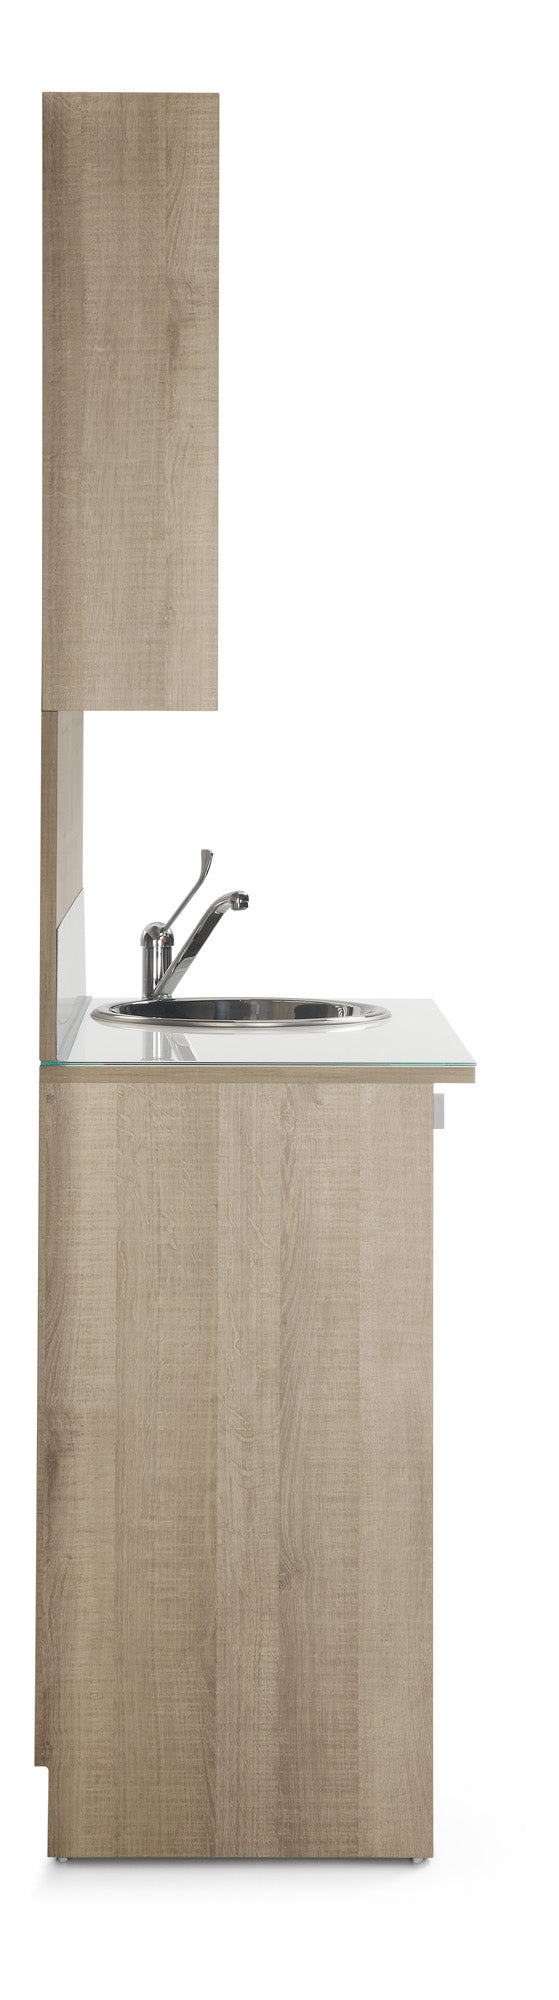 Cara Collection Labo Laboratory Mixing Corner without basin